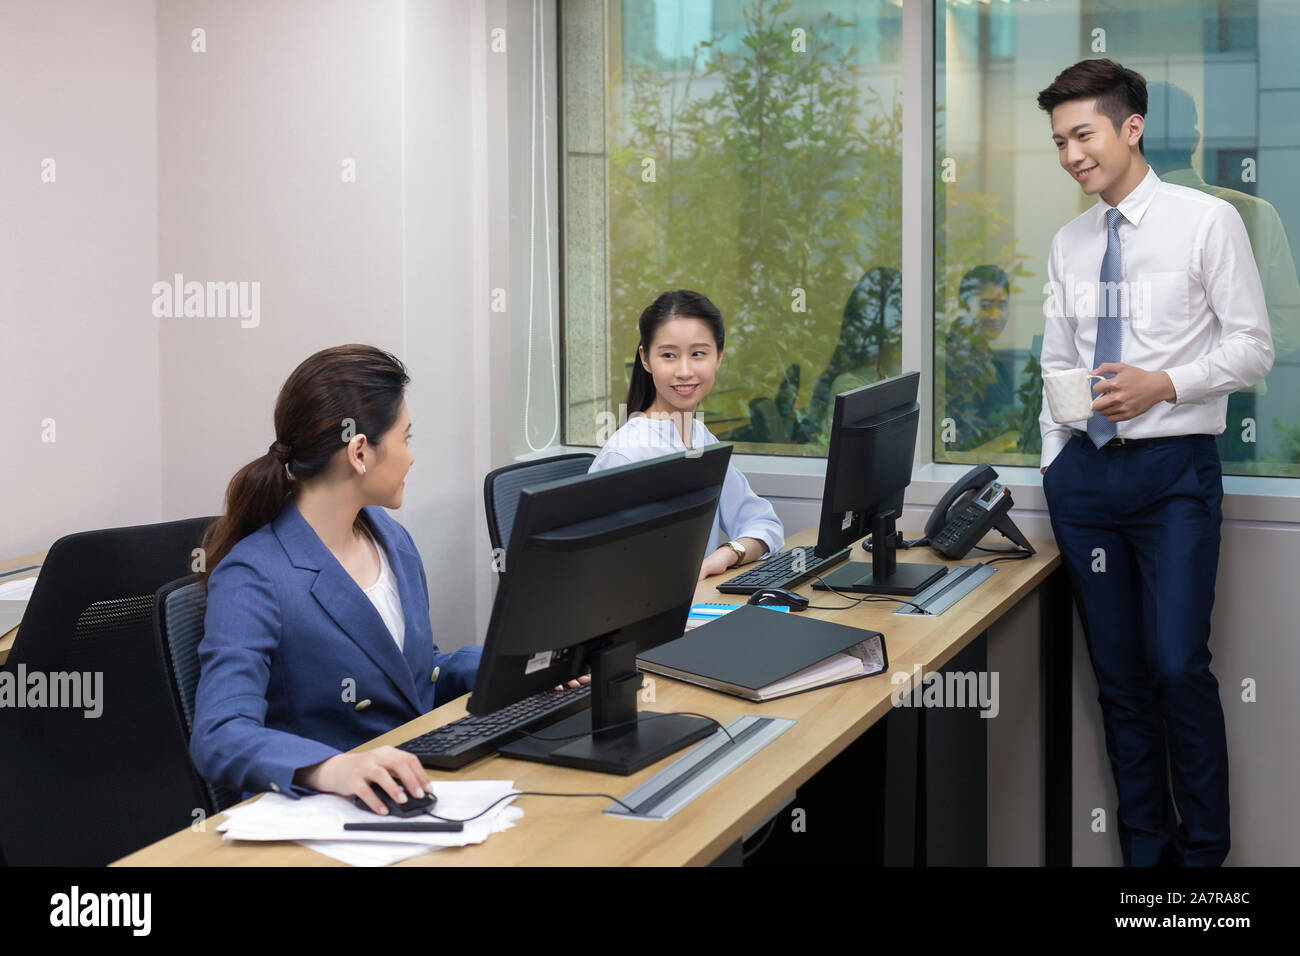 Photograph of three male and female businesspeople in an office with two of them talking while using computers at their desks and another one standing Stock Photo